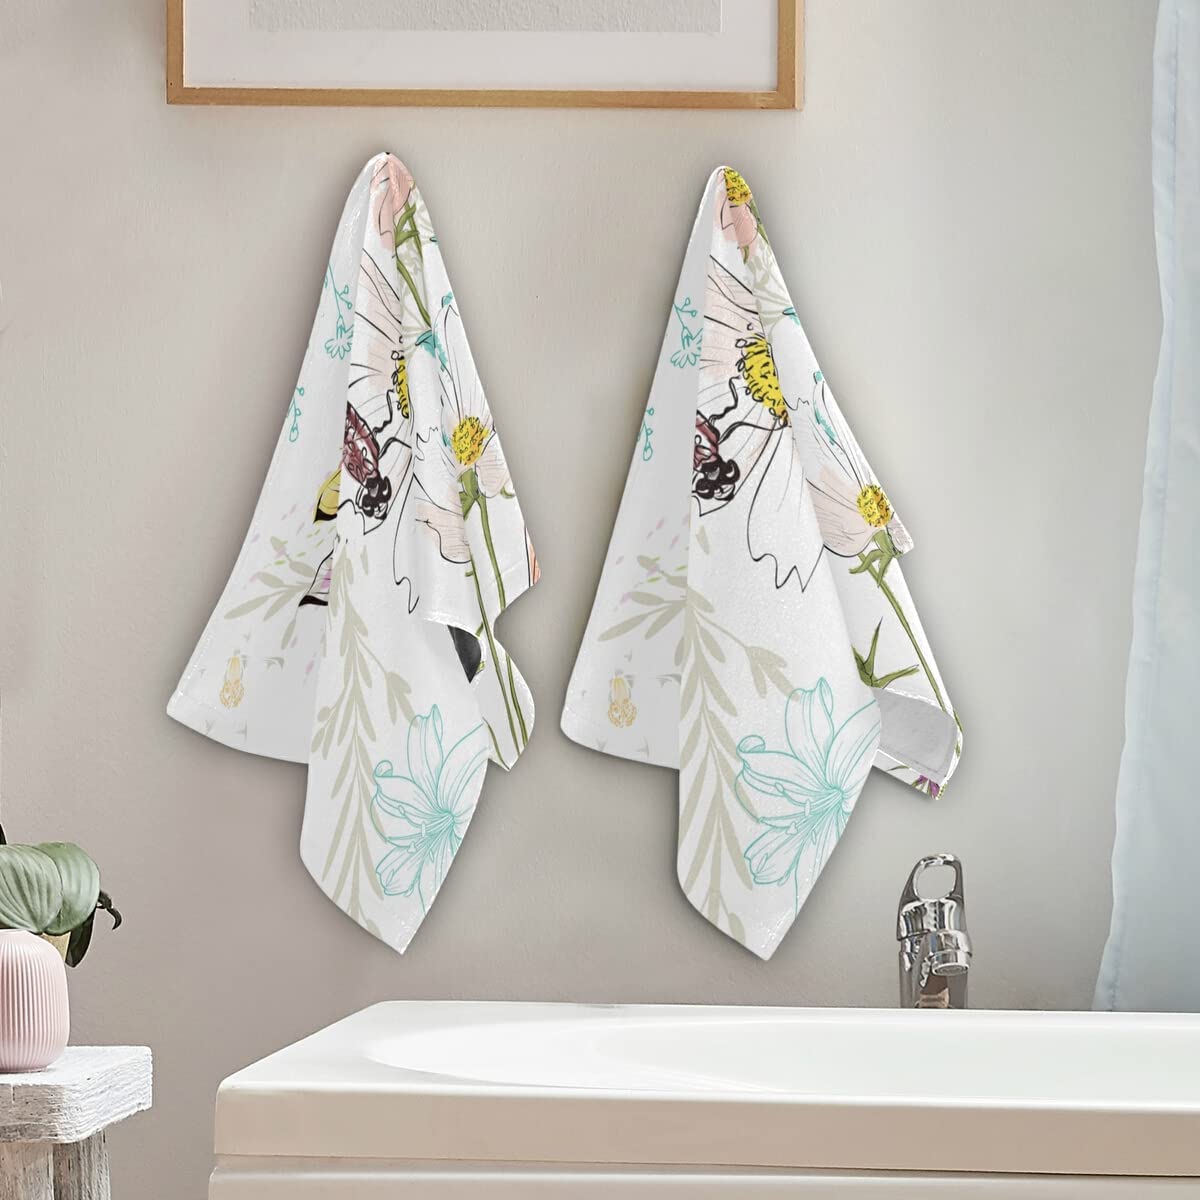 Watercolor Dragonfly Hand Towel 2 Pieces Daisy Flowers Bath Towels Soft Absorbent Fingertip Towels for Bathroom Kitchen Gym Yoga Decor